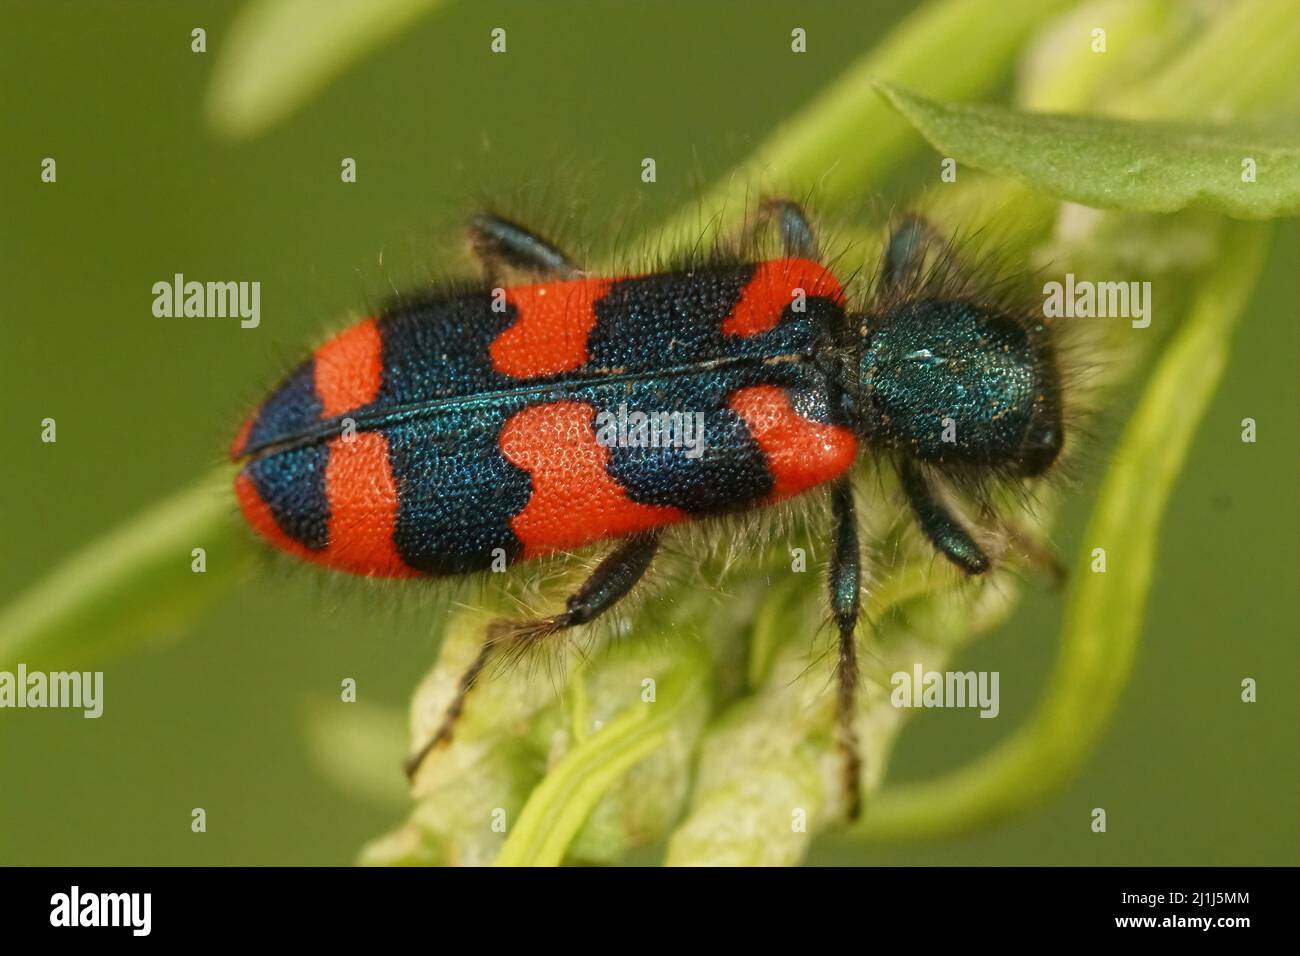 Closeup of the colorful red beewolf beetle, Trichodes apiarius from the Gard, France, sitting in green vegetation Stock Photo